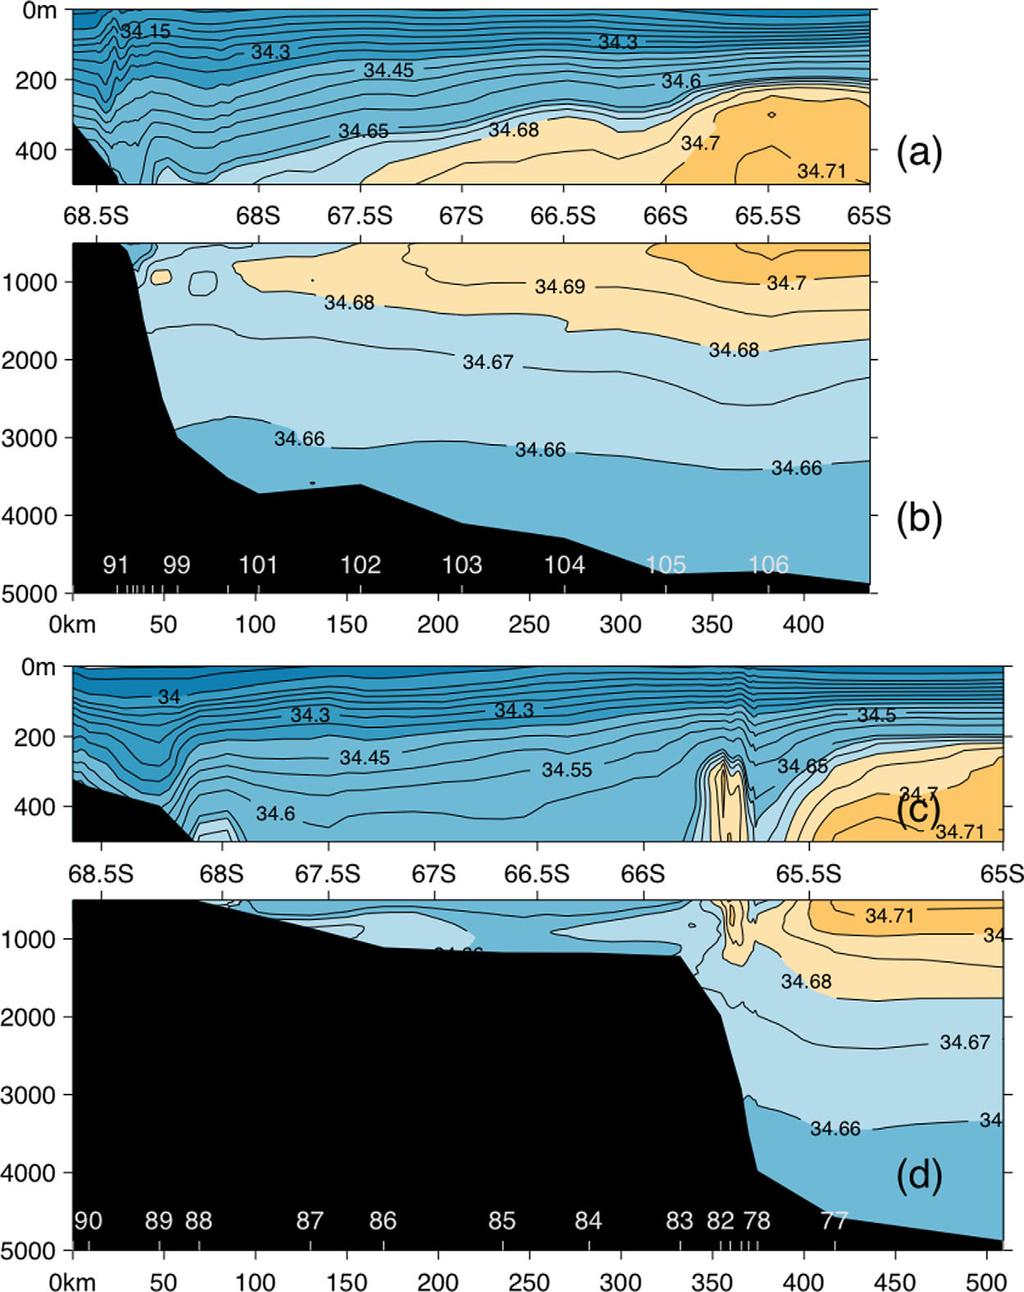 Figure 4. Salinity (psu; CTD data) of the western section and the eastern section as in Figure 3. as the western section, and the north and east sections are combined together as the eastern section.